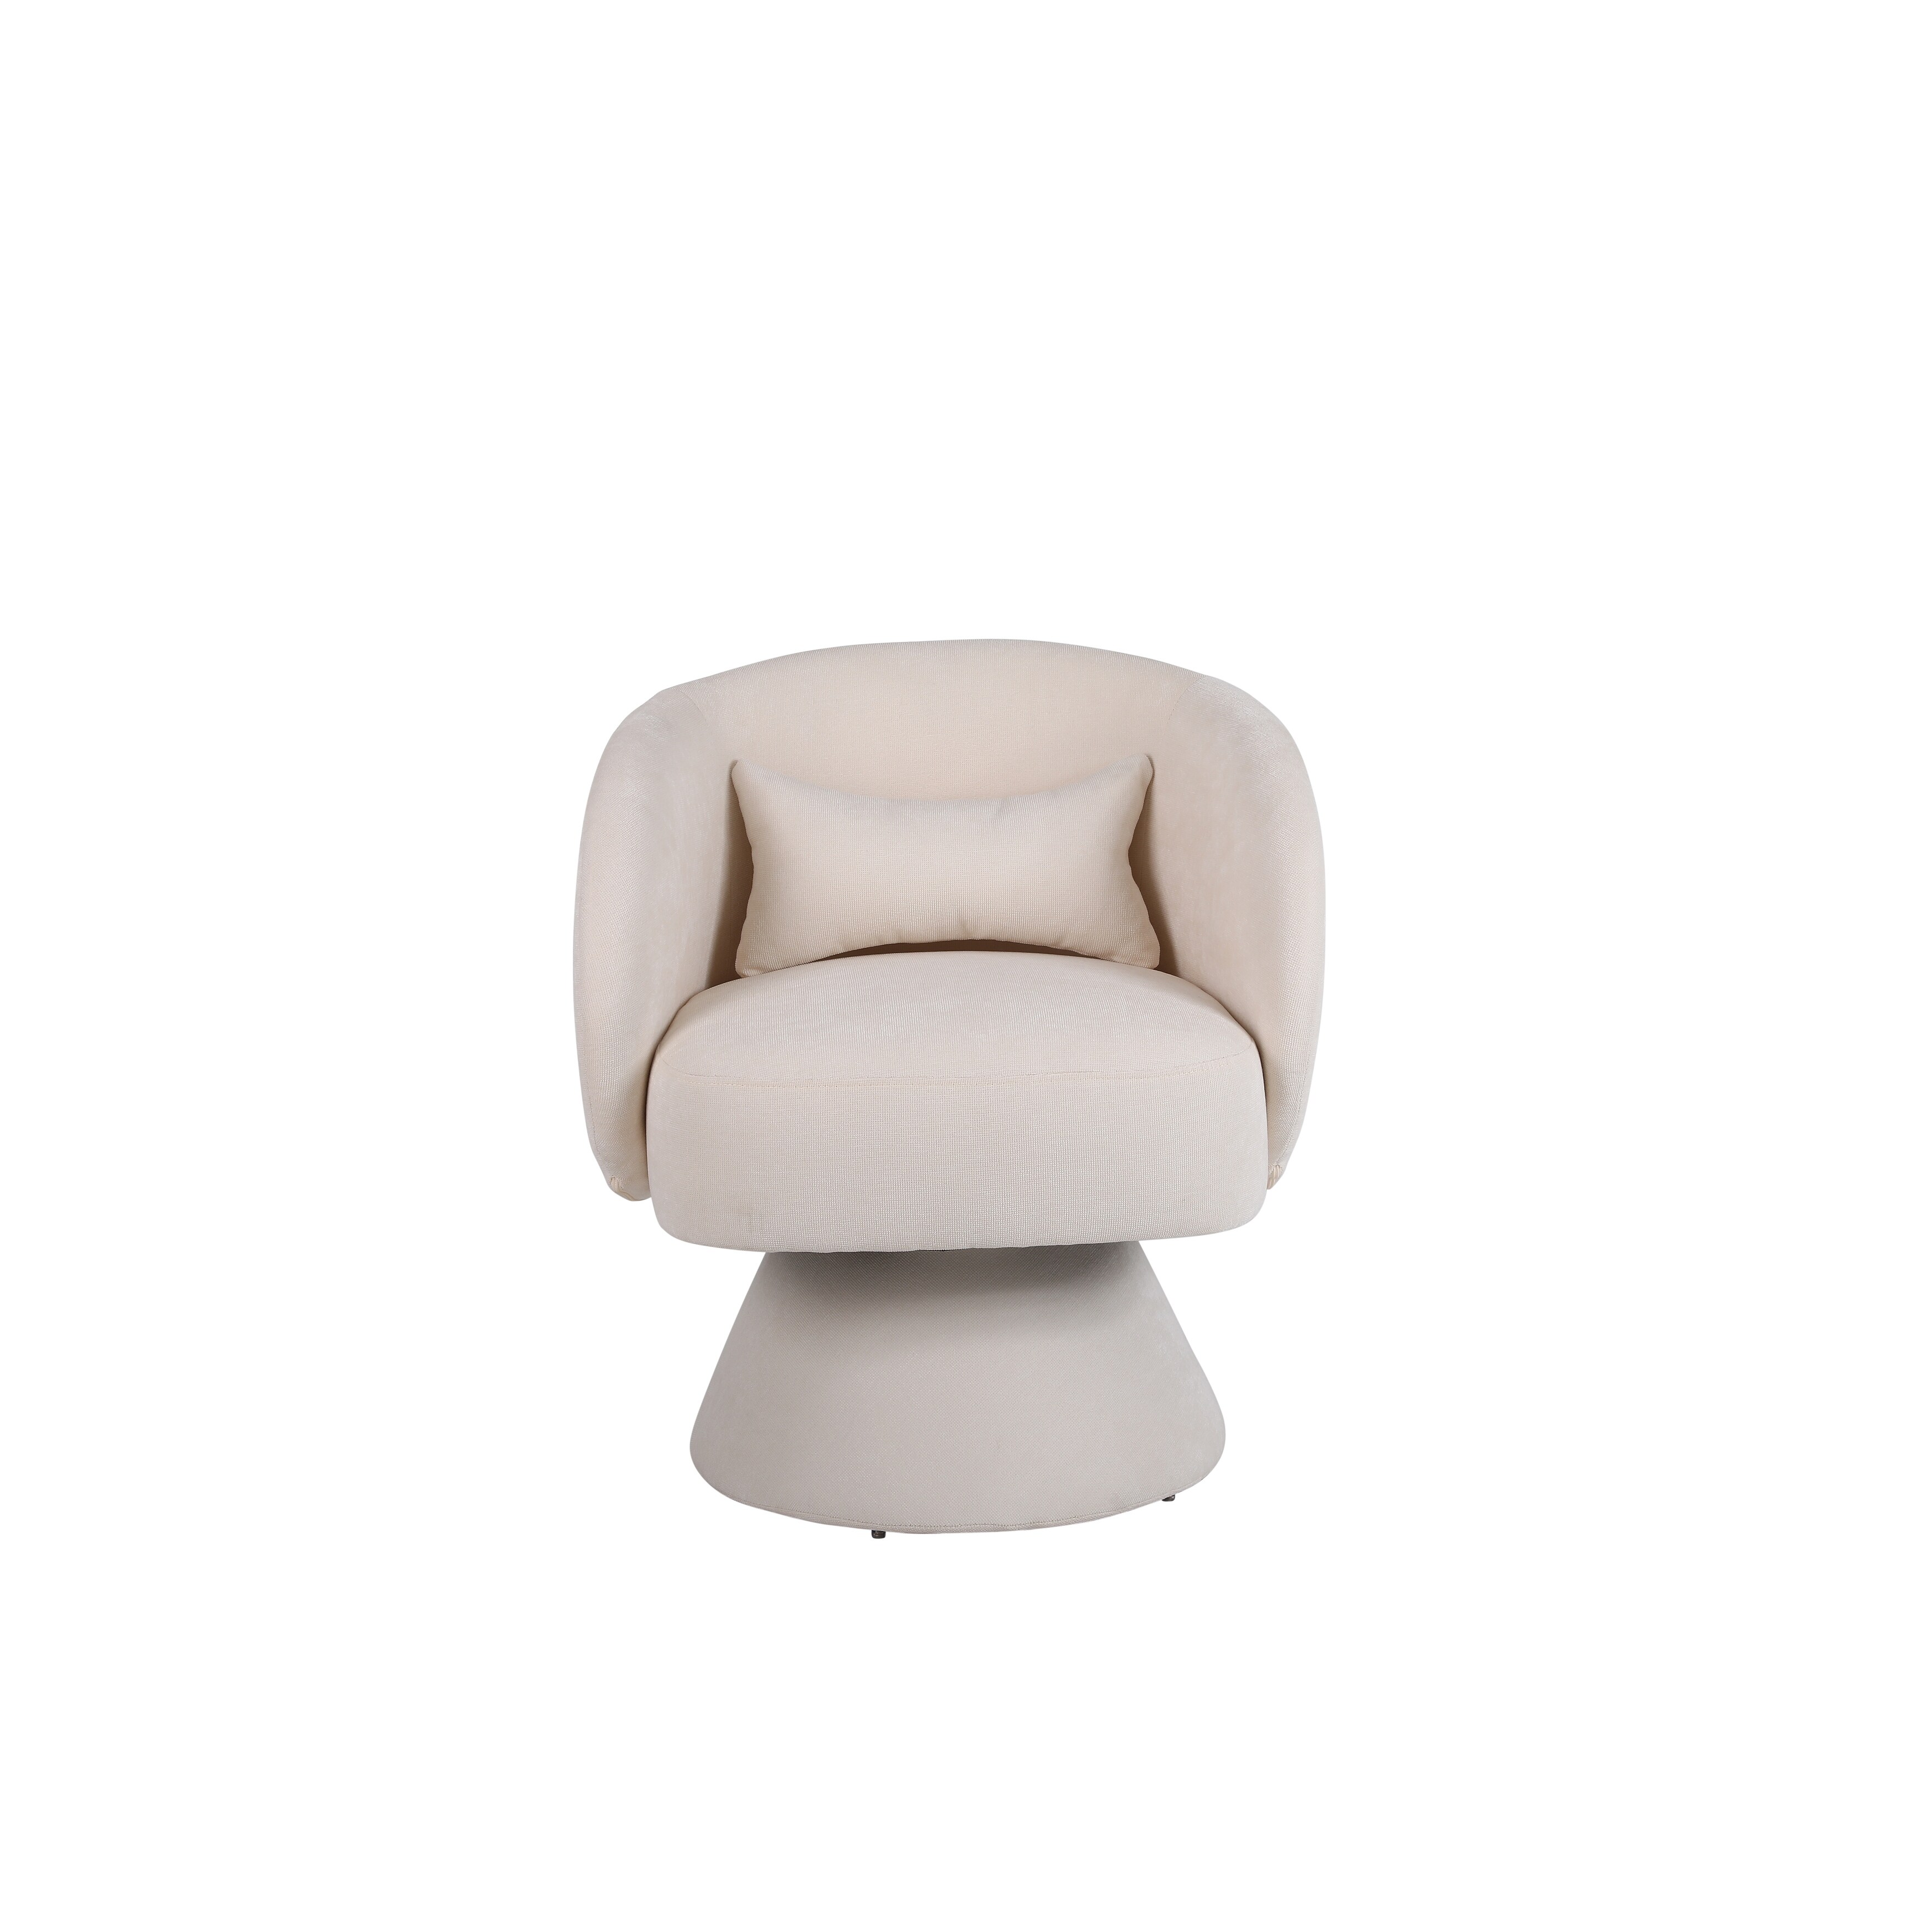 https://ak1.ostkcdn.com/images/products/is/images/direct/2e2e5e5adea0175dca89b9fd6d1f8717eec49b57/Round-Barrel-Swivel-Chairs-in-Performance-Fabric-with-Small-Pillow%2C-Linen-Accent-Chair-Swivel-Armchair-for-Living-Room-Bedroom.jpg